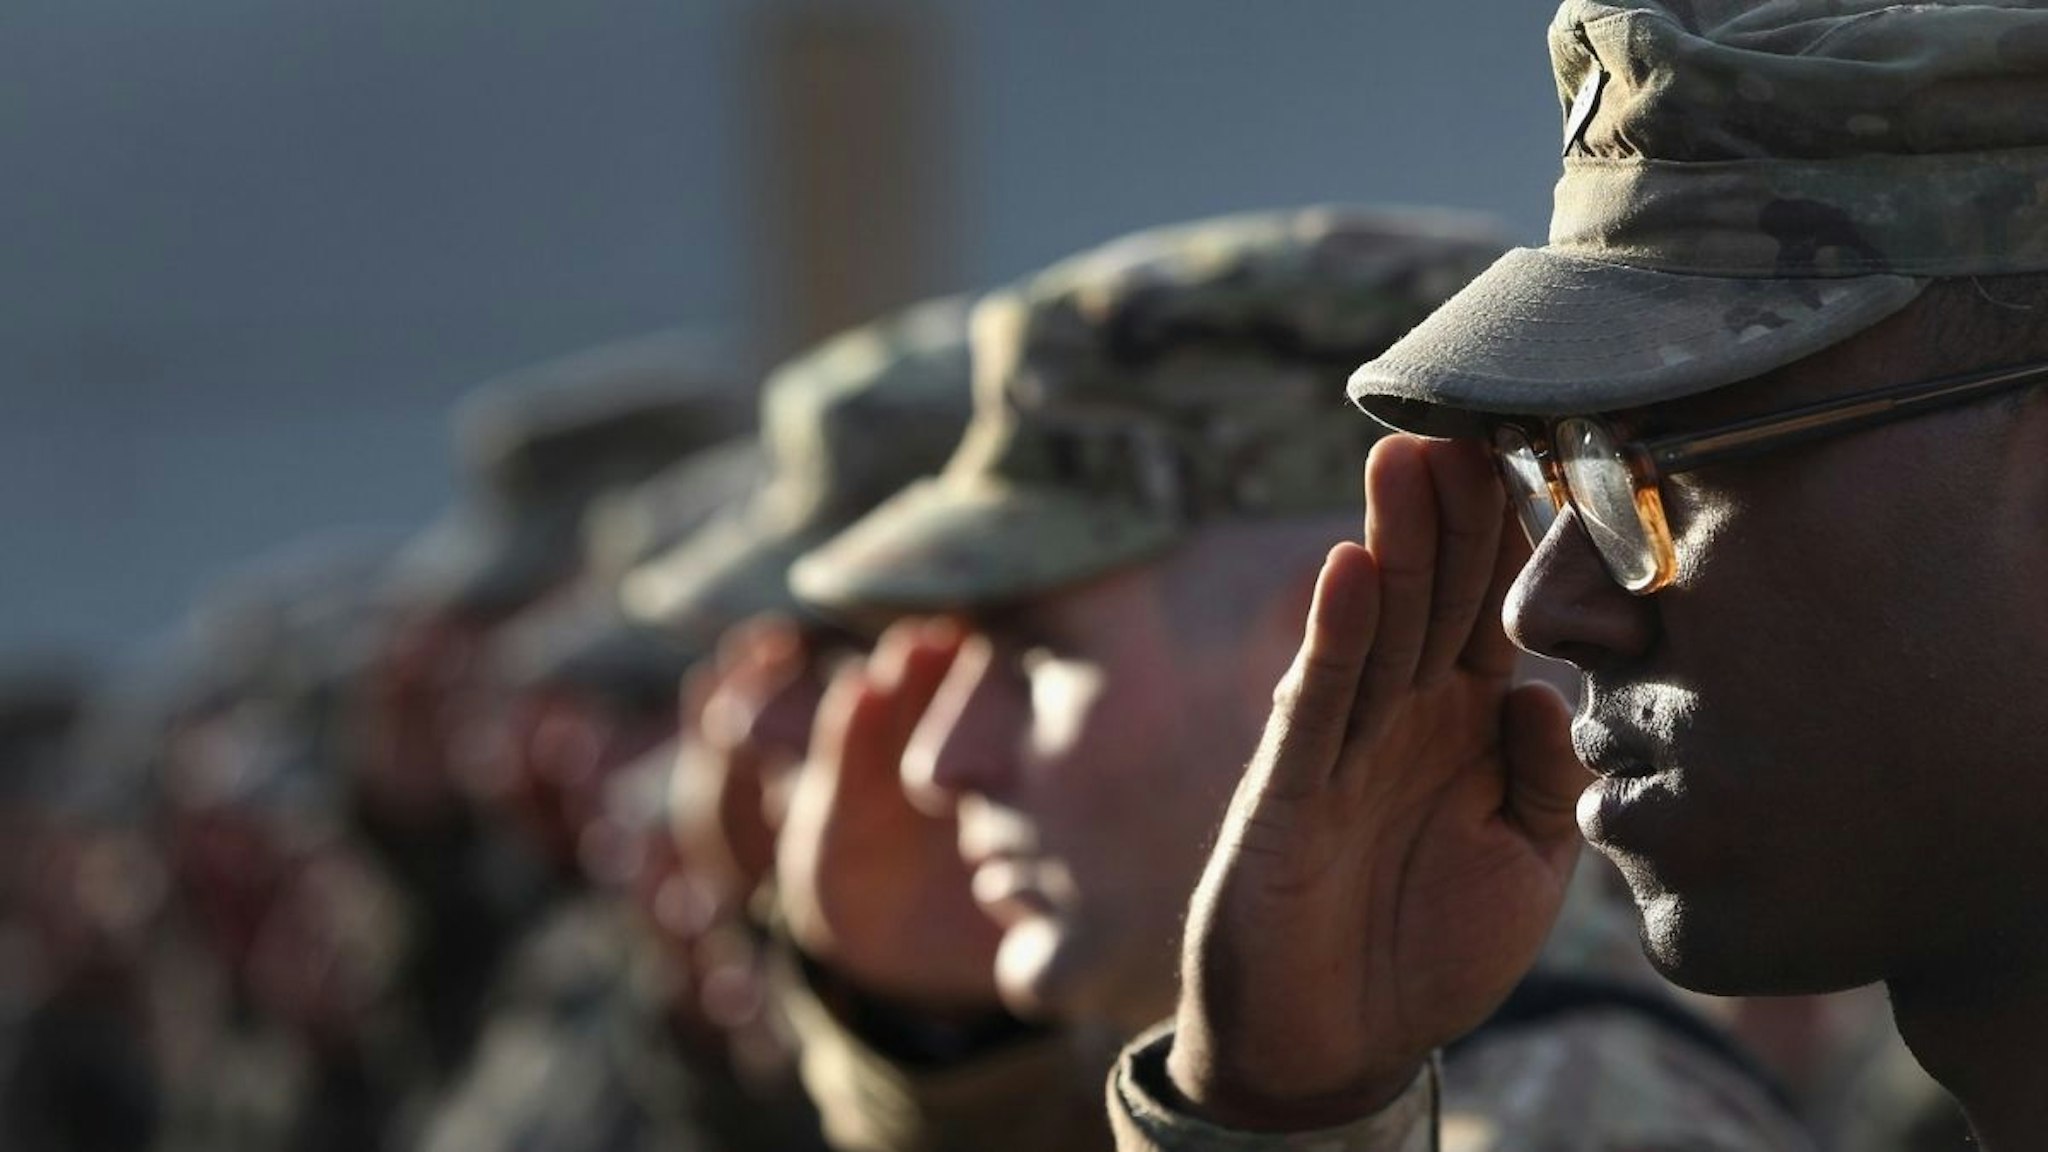 U.S. Army soldiers salute during the national anthem during the an anniversary ceremony of the terrorist attacks on September 11, 2001 on September 11, 2011 at Bagram Air Field, Afghanistan.